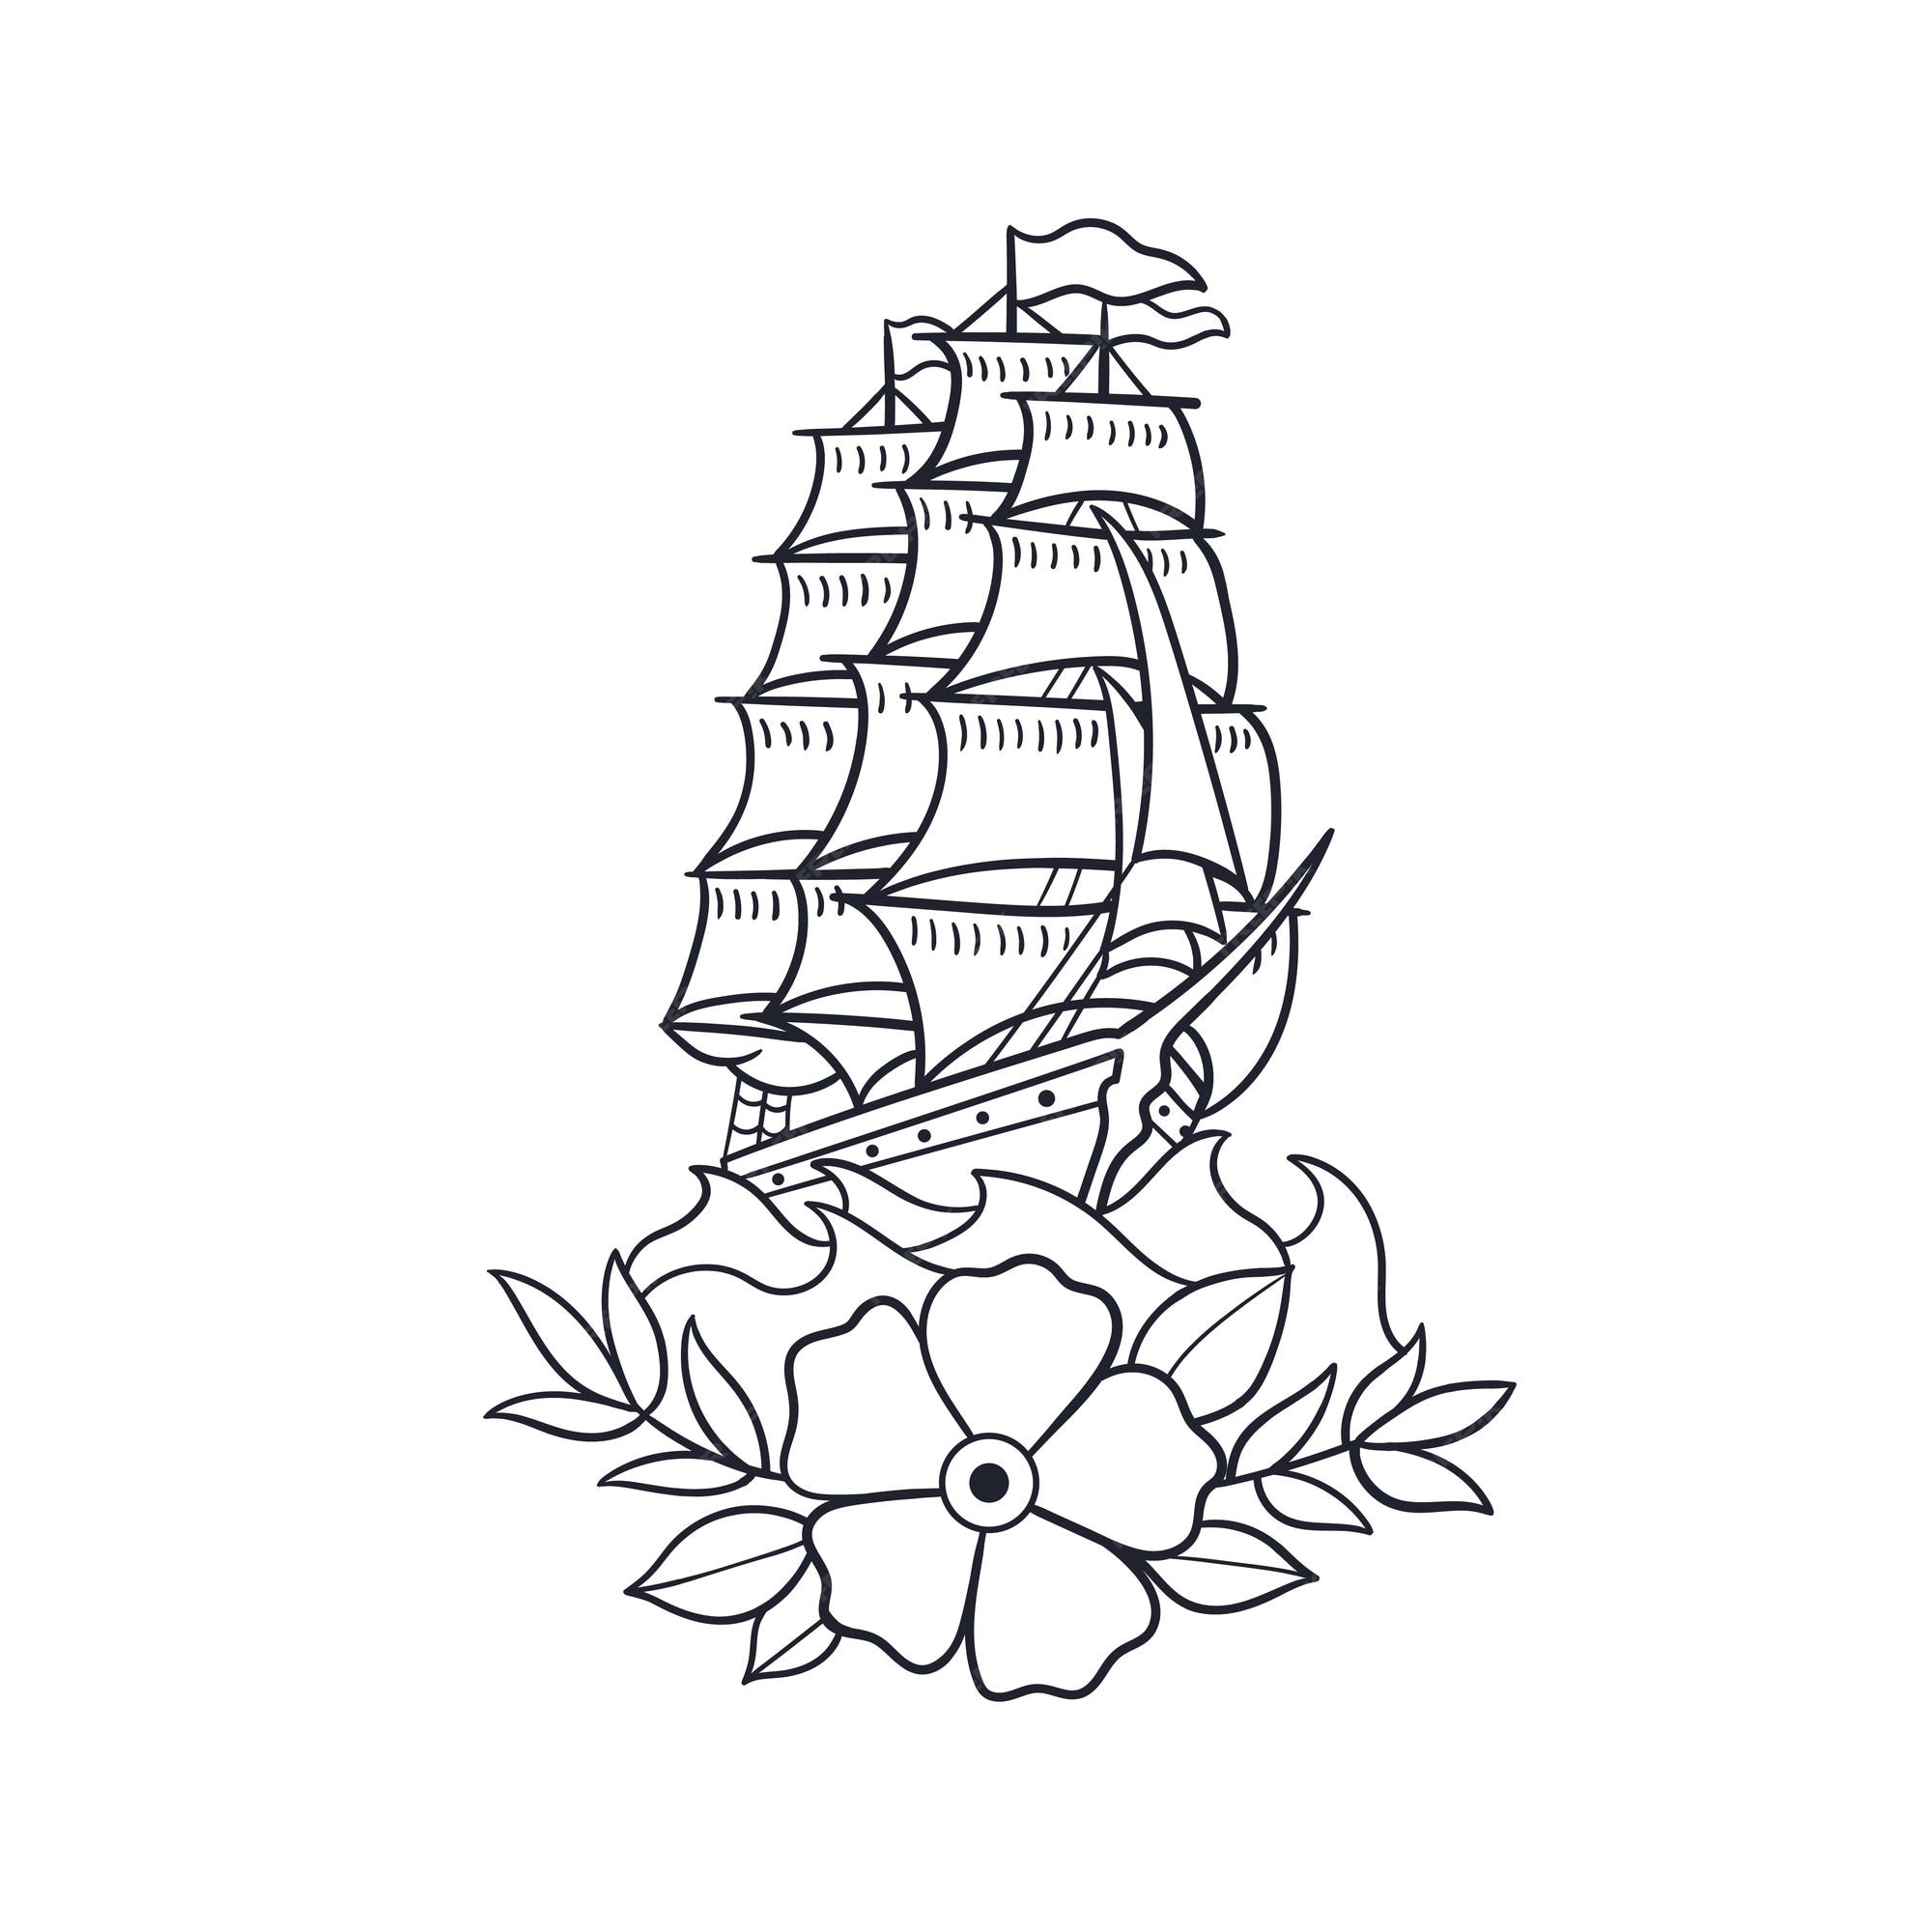 Premium vector hand drawn illustration of a pirate ship outline